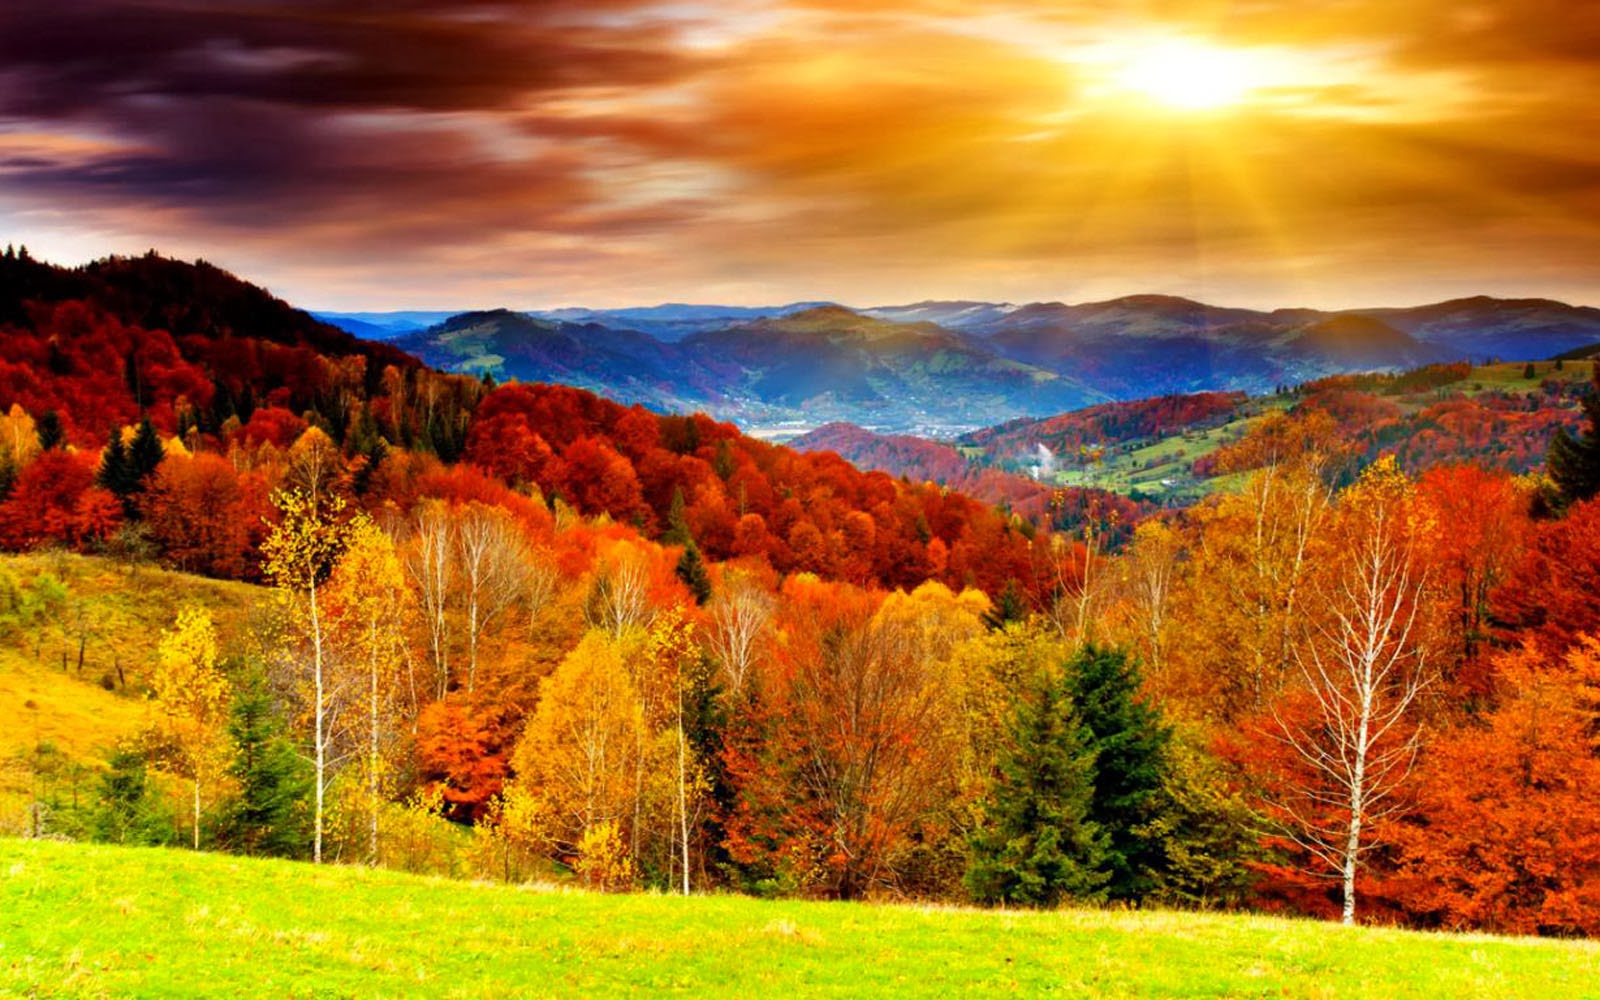 Tag: Autumn Scenery Wallpapers, Backgrounds, Photos, Images and ...